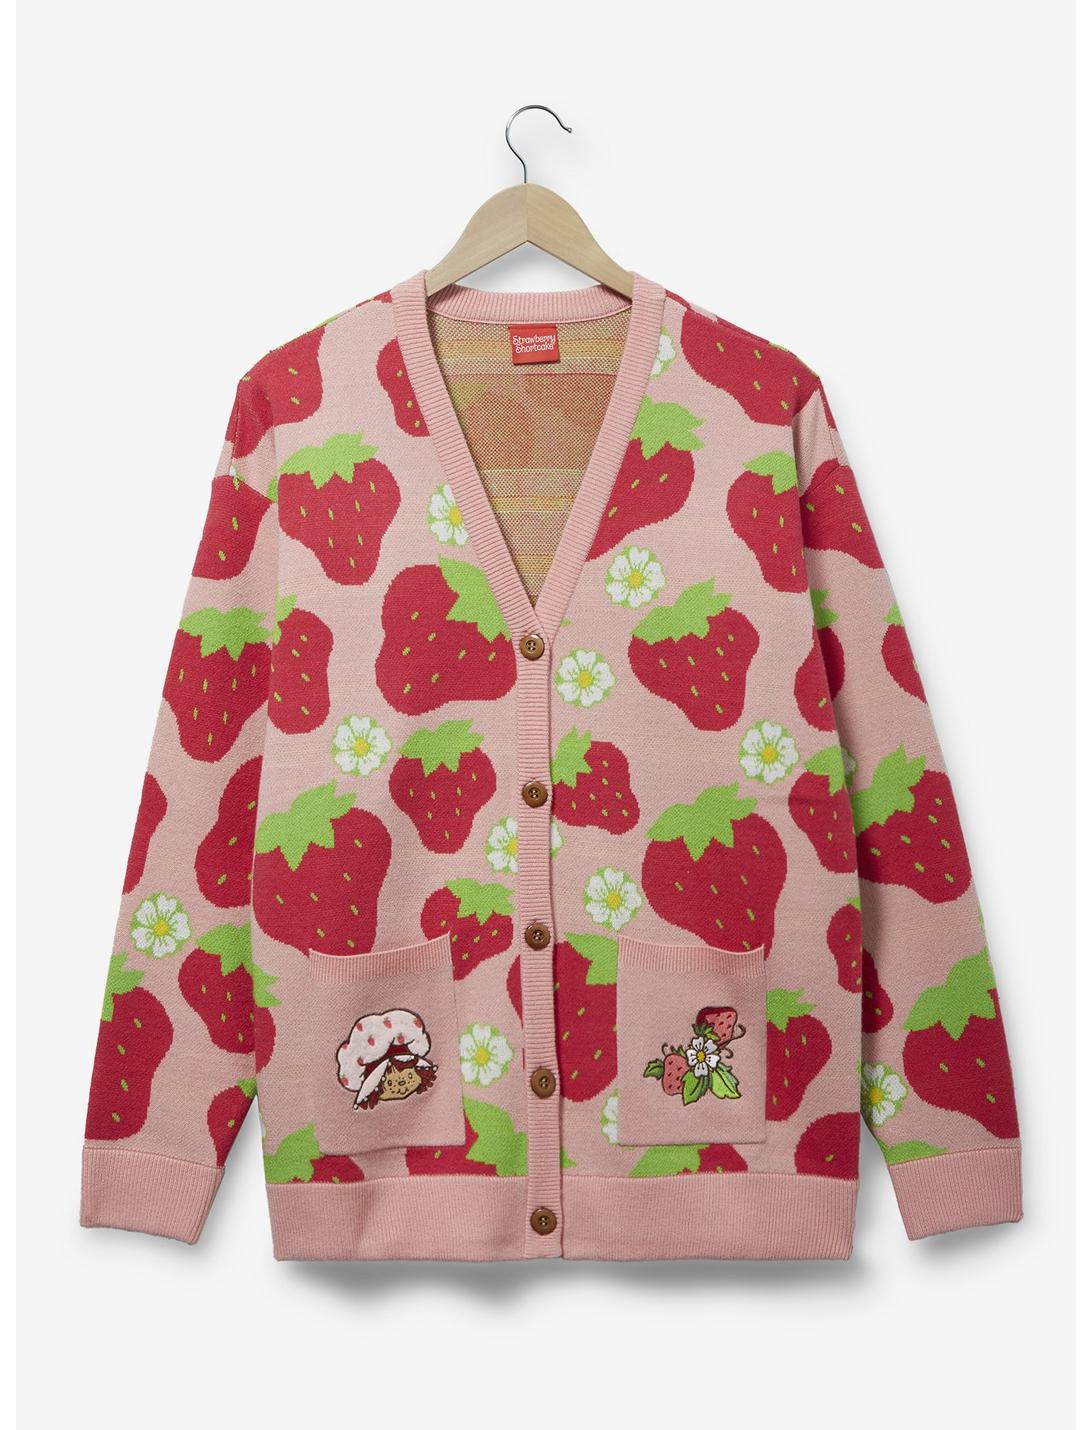 Strawberry Shortcake Allover Strawberry Print Women's Plus Size Cardigan - BoxLunch Exclusive, LIGHT PINK, hi-res